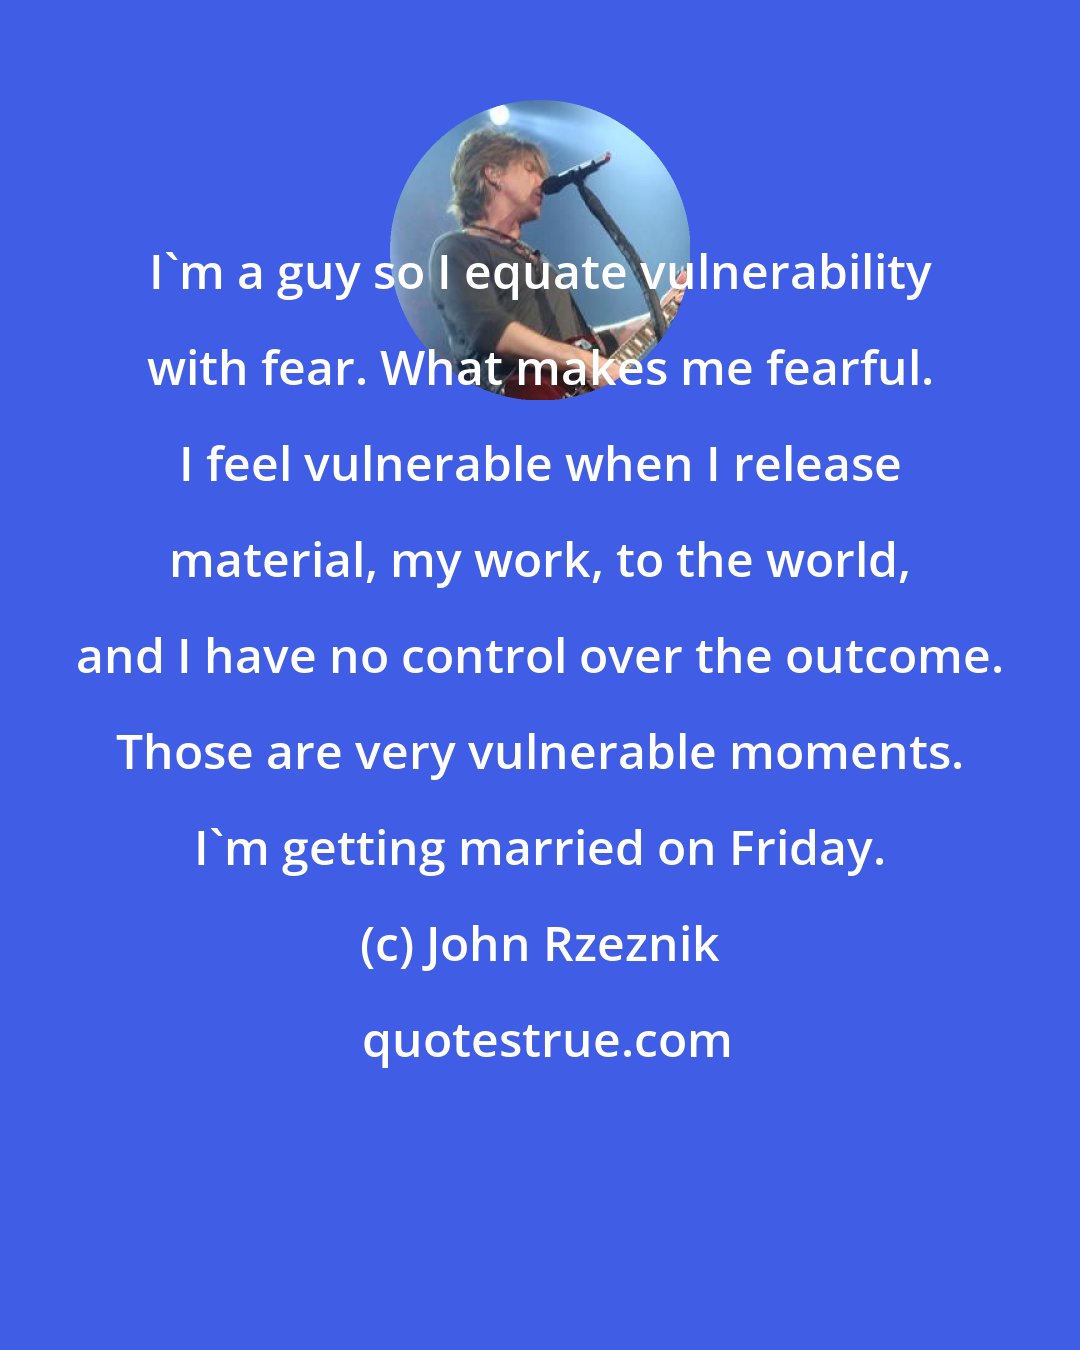 John Rzeznik: I'm a guy so I equate vulnerability with fear. What makes me fearful. I feel vulnerable when I release material, my work, to the world, and I have no control over the outcome. Those are very vulnerable moments. I'm getting married on Friday.